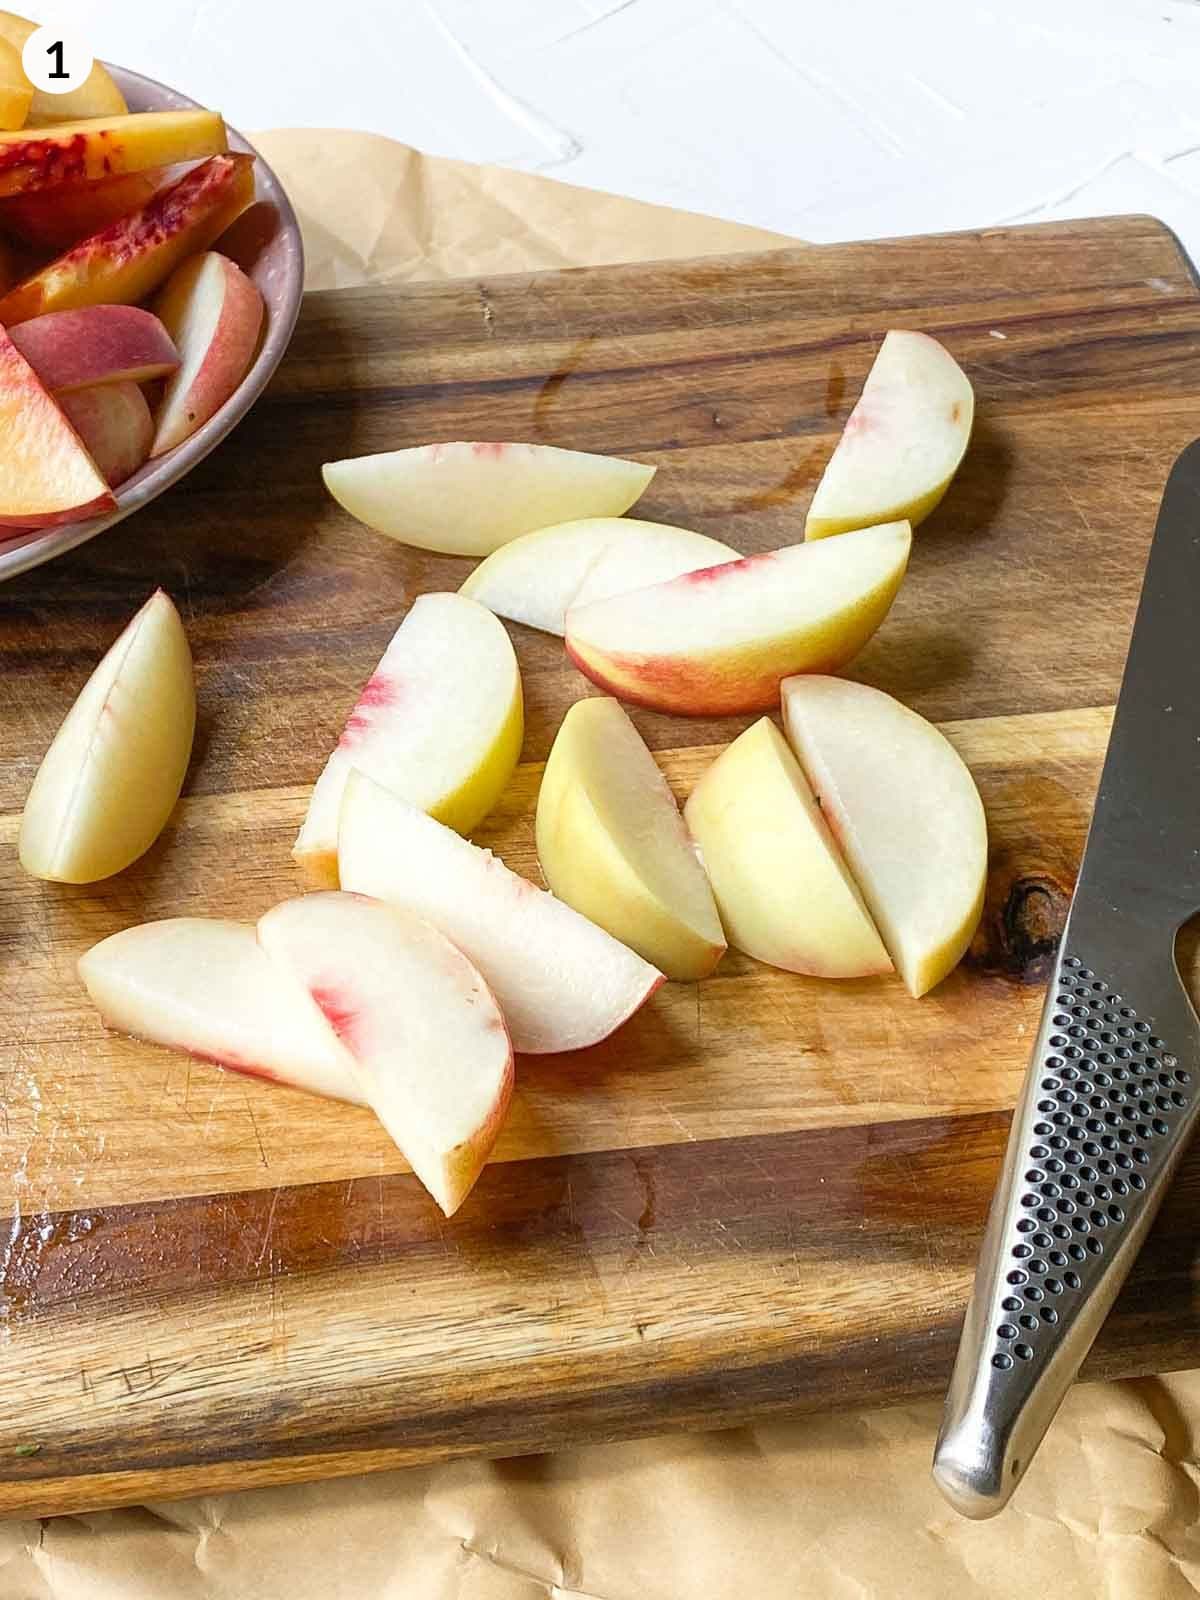 cut wedges of peach next a knife on a wooden chopping board